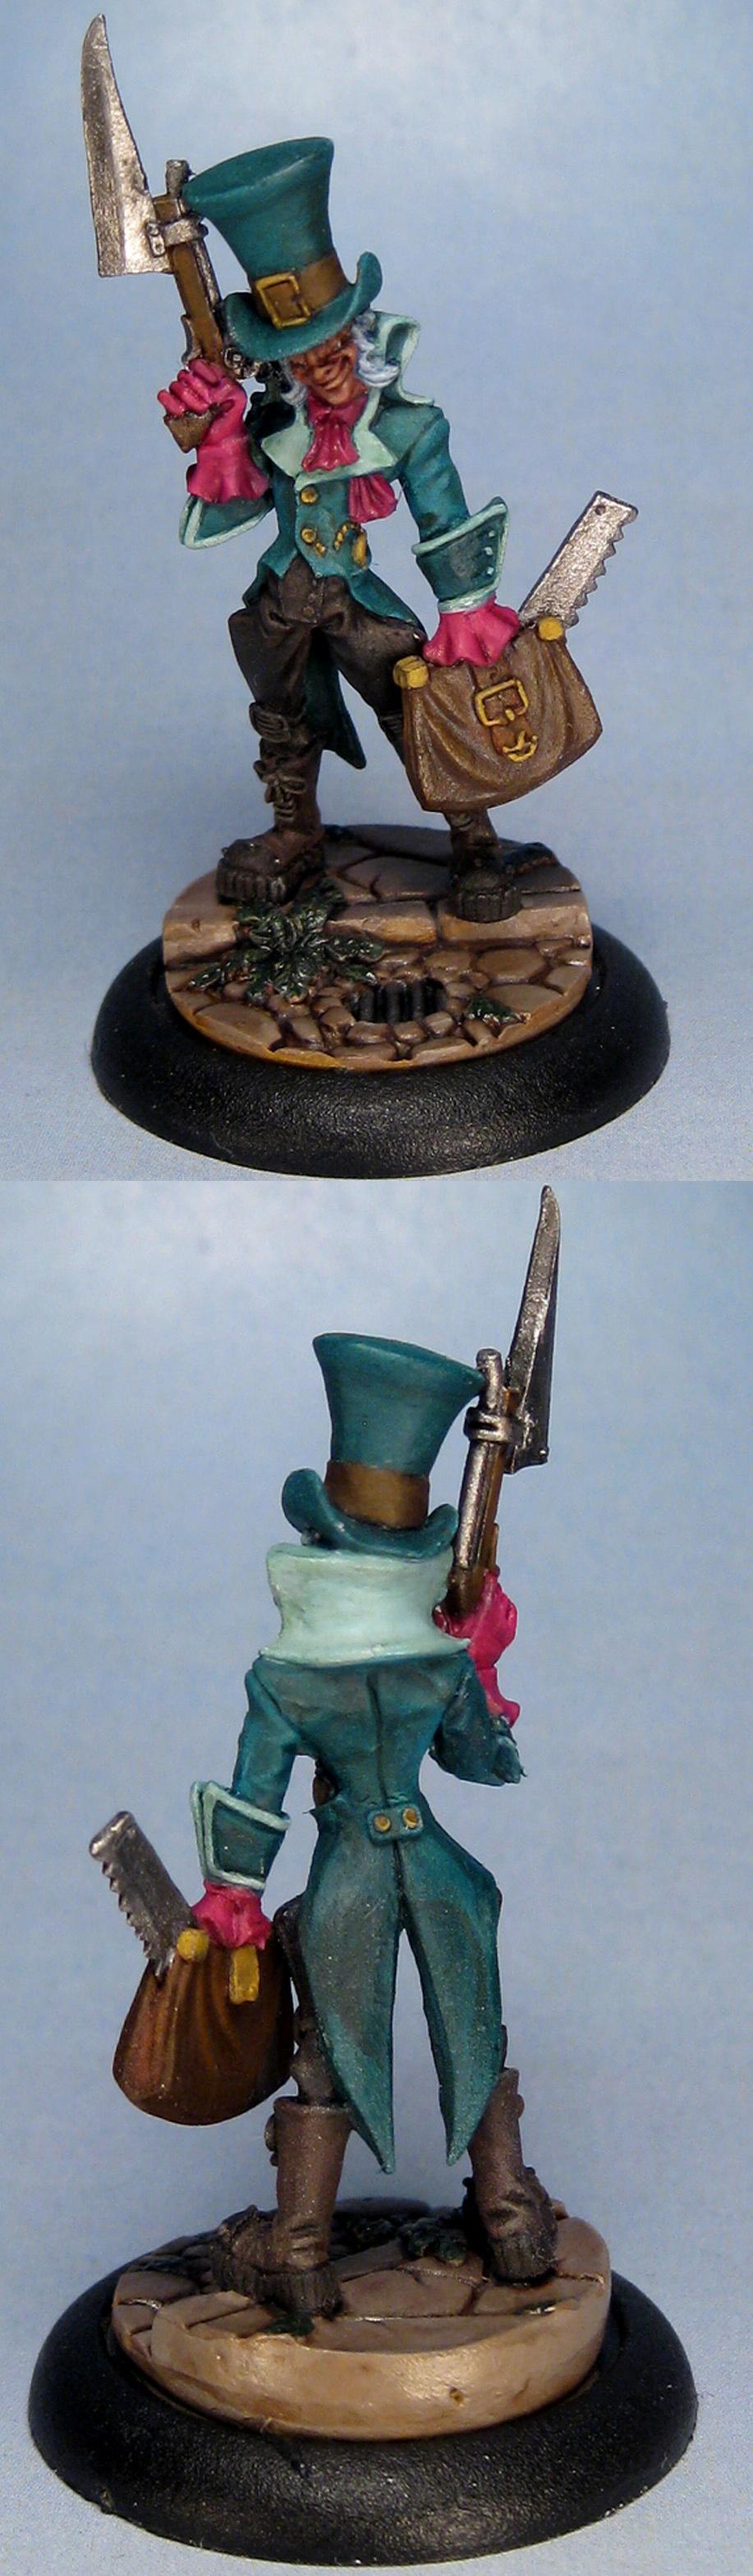 Horrors, Mad Hatter, Malifaux, Steampunk